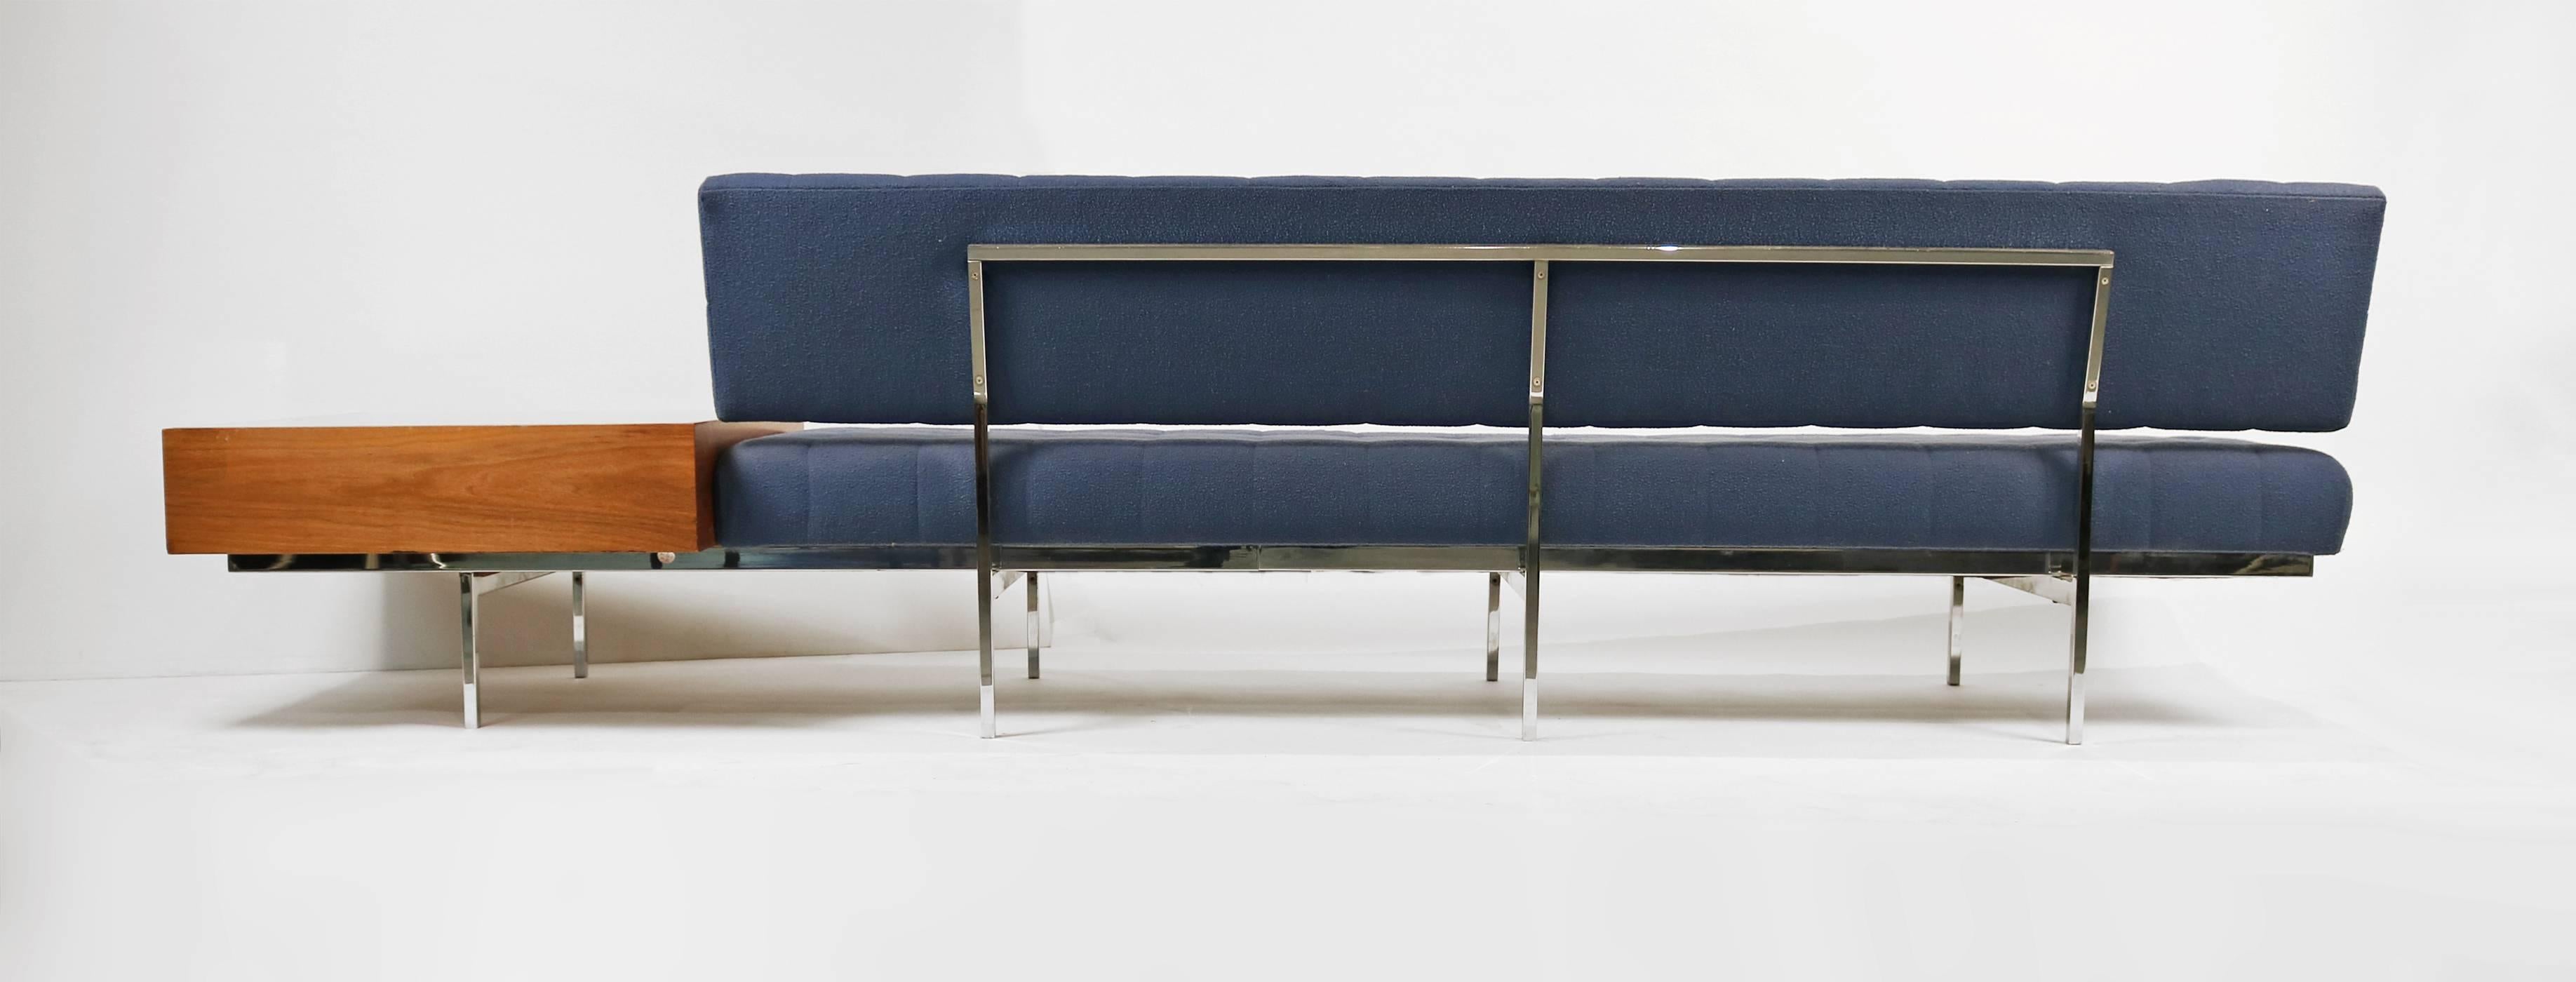 American Architectural Florence Knoll Sofa with Table Attachment for Knoll